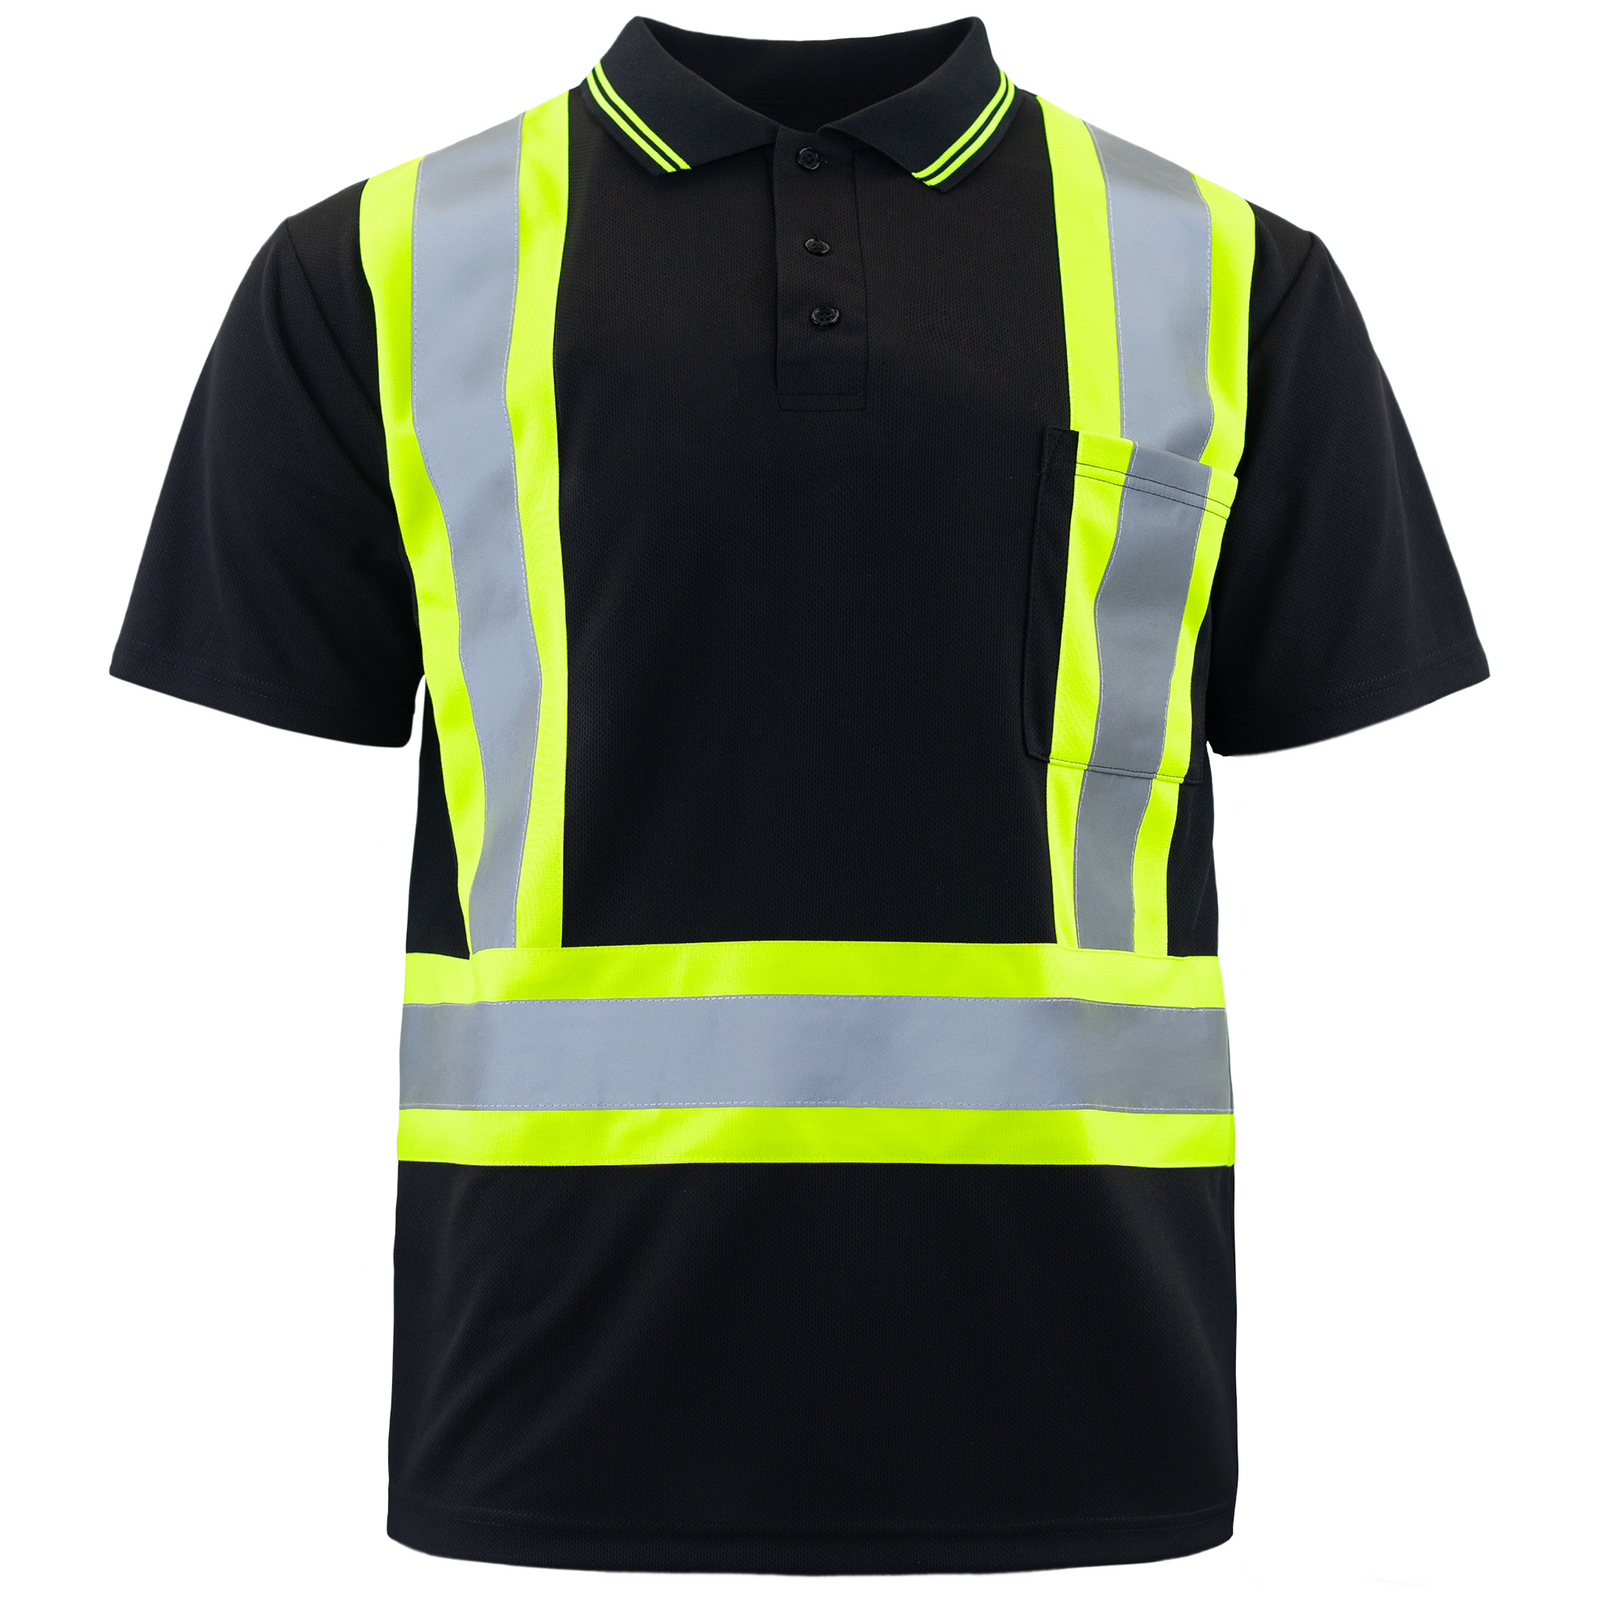 Black high visibility reflective safety polo button up shirt with contrasting lime strips polo style collar and chest pocket